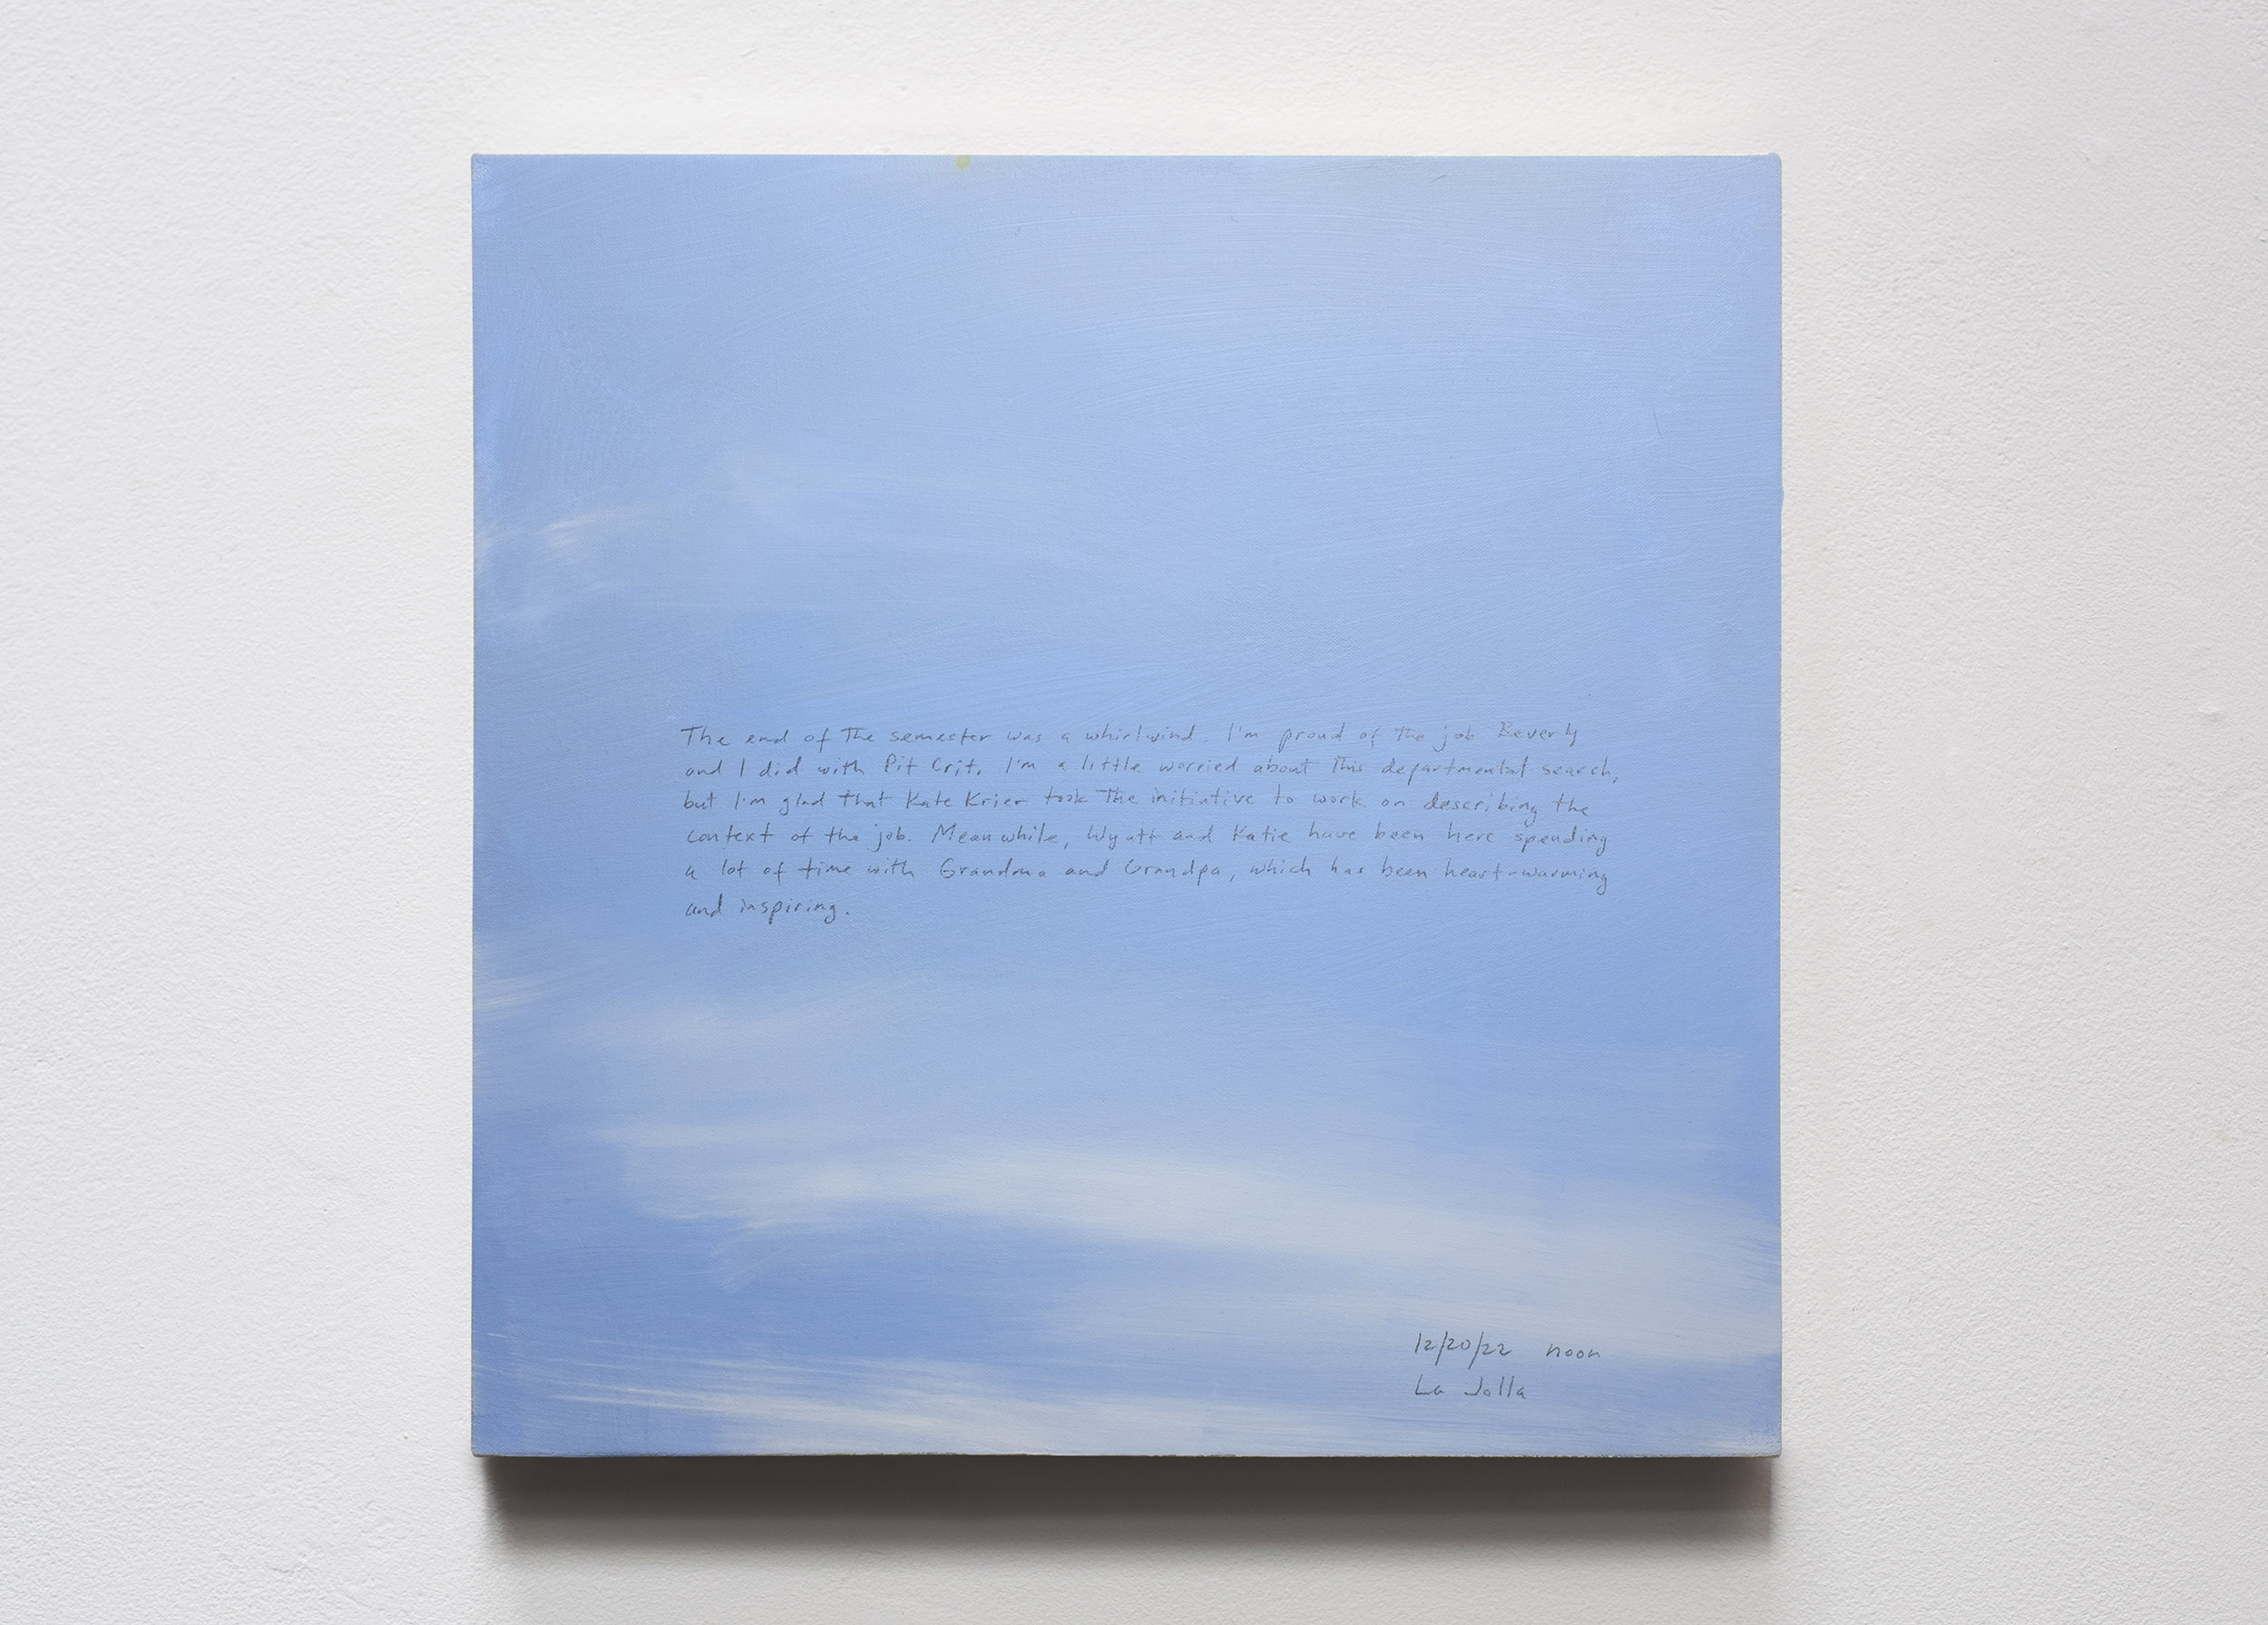 A 14 × 14 inch, acrylic painting of the sky. A journal entry is handwritten on the painting:

“The end of the semester was a whirlwind. I’m proud of the job Beverly and I did with Pit Crit. I’m a little worried about this departmental search, but I’m glad that Kate Krier took the initiative to work on describing the context of the job. Meanwhile, Wyatt and Katie have been here spending a lot of time with Grandma and Grandpa, which has been heart-warming and inspiring.

12/20/22 noon
La Jolla”